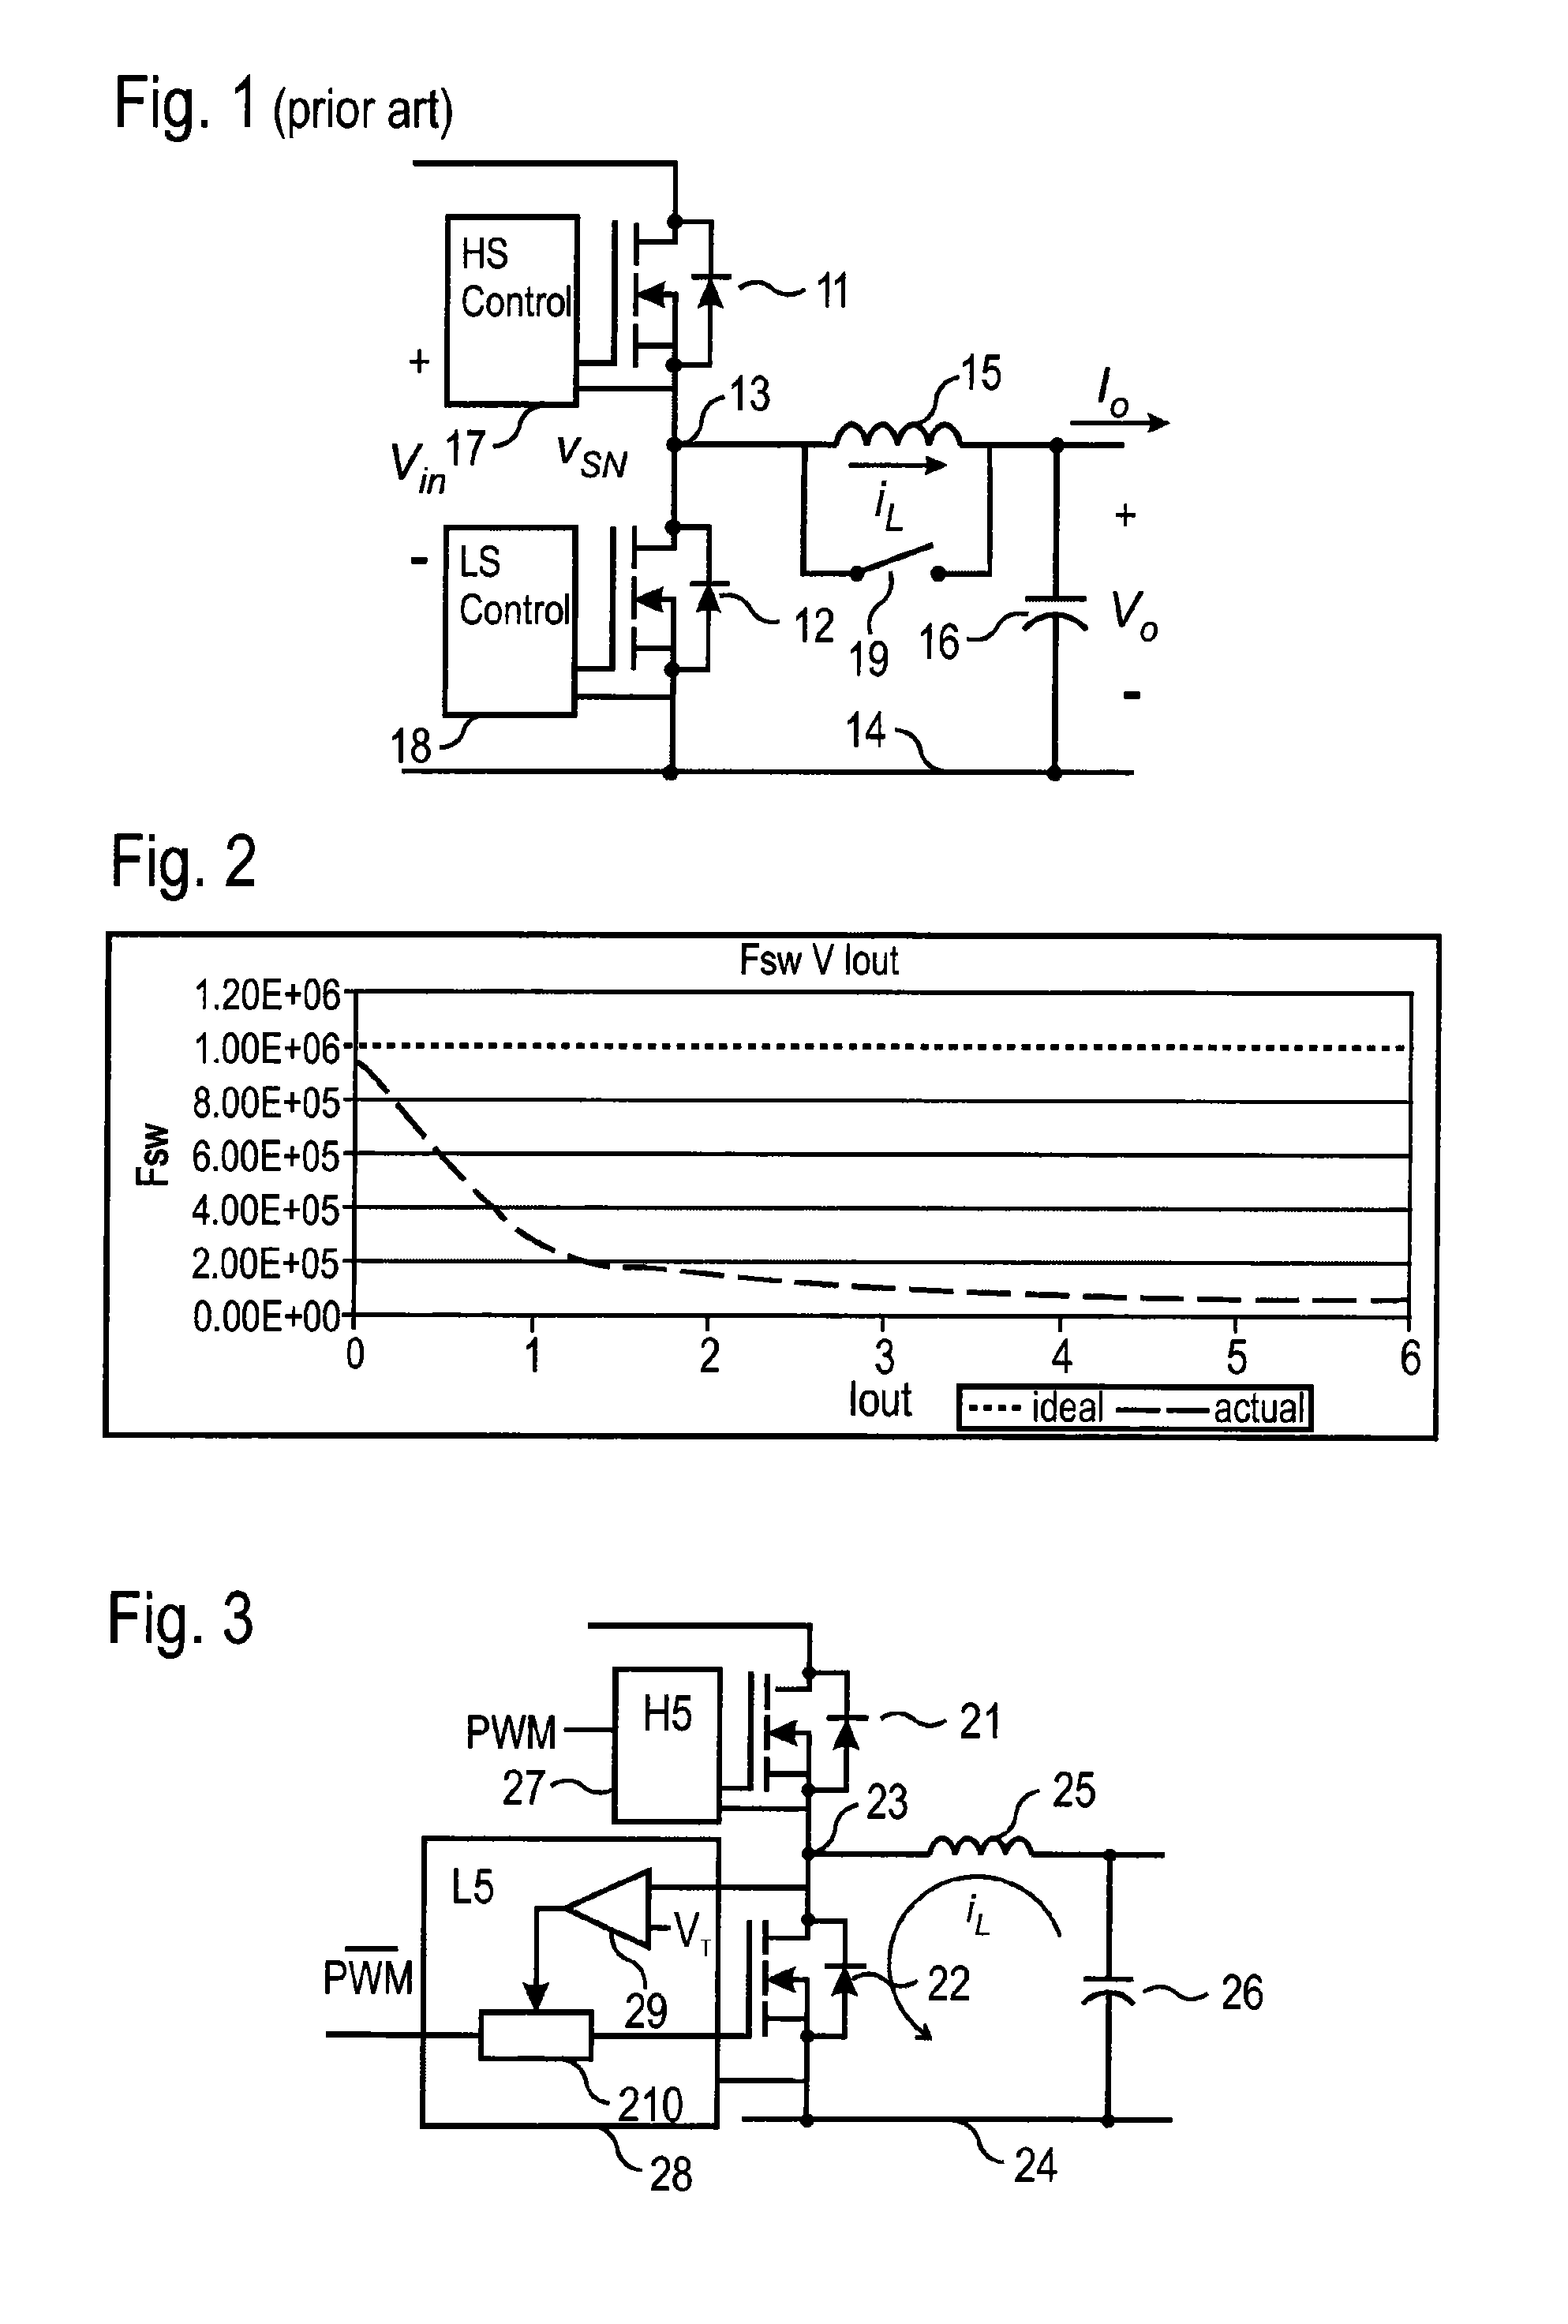 Buck converter with a stabilized switching frequency